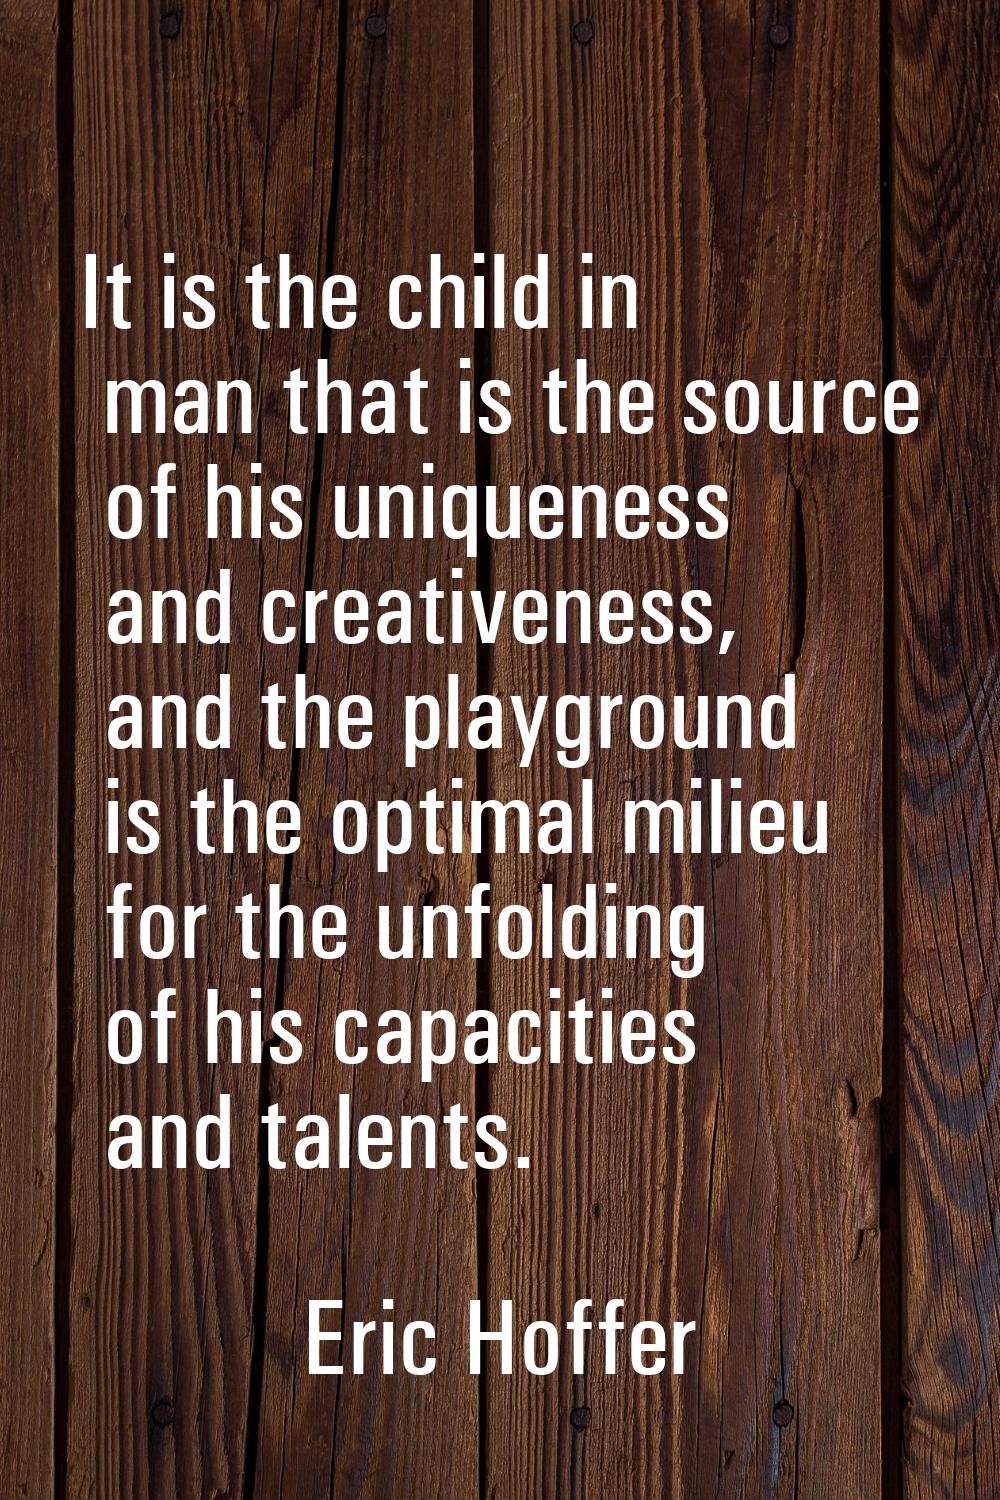 It is the child in man that is the source of his uniqueness and creativeness, and the playground is